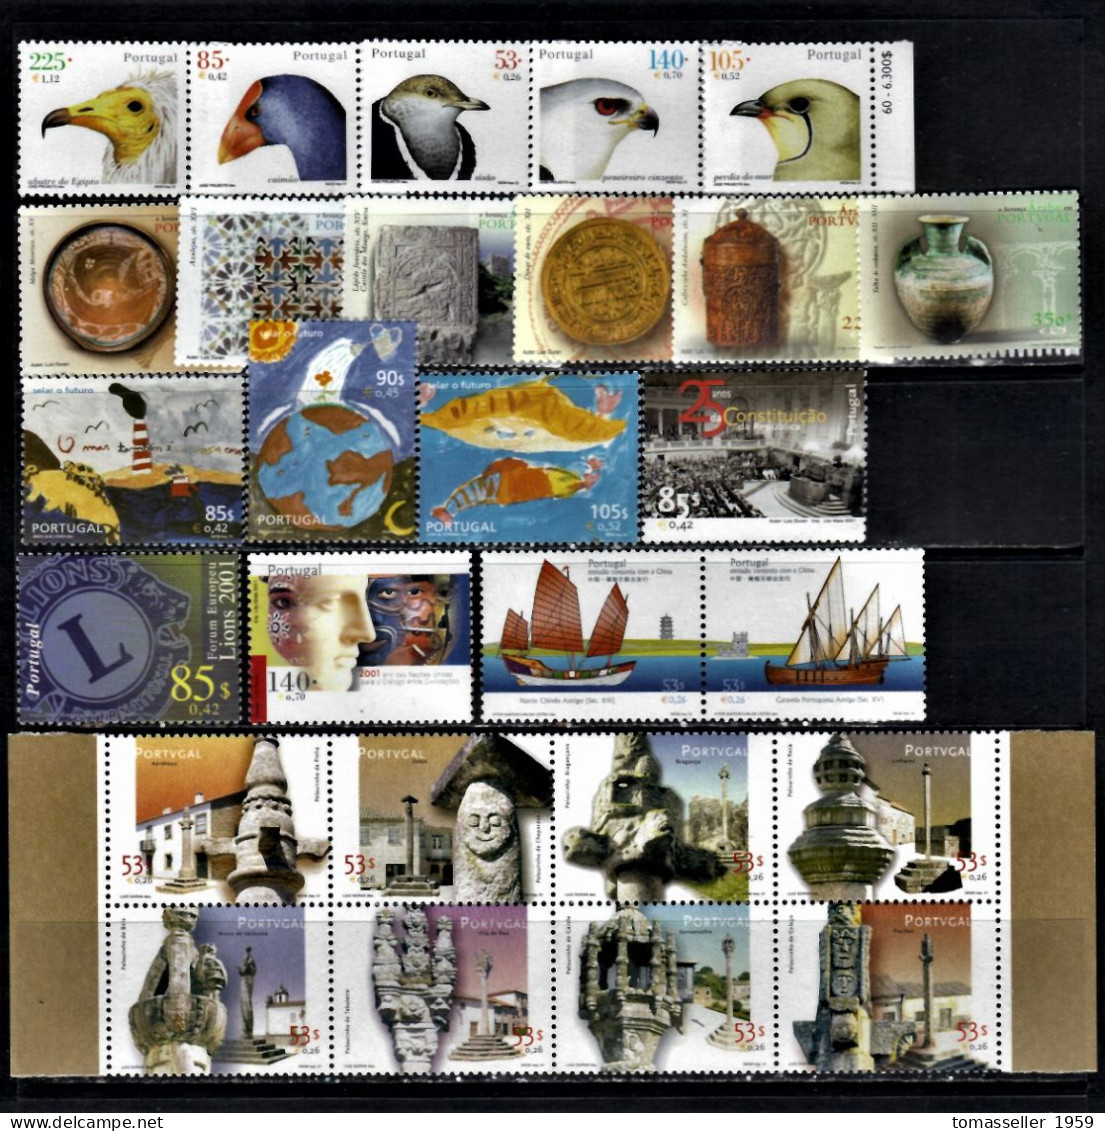 Portugal-2001- Year Set. 19 Issues-(stamps,s/s,booklets)-MNH** - Volledig Jaar